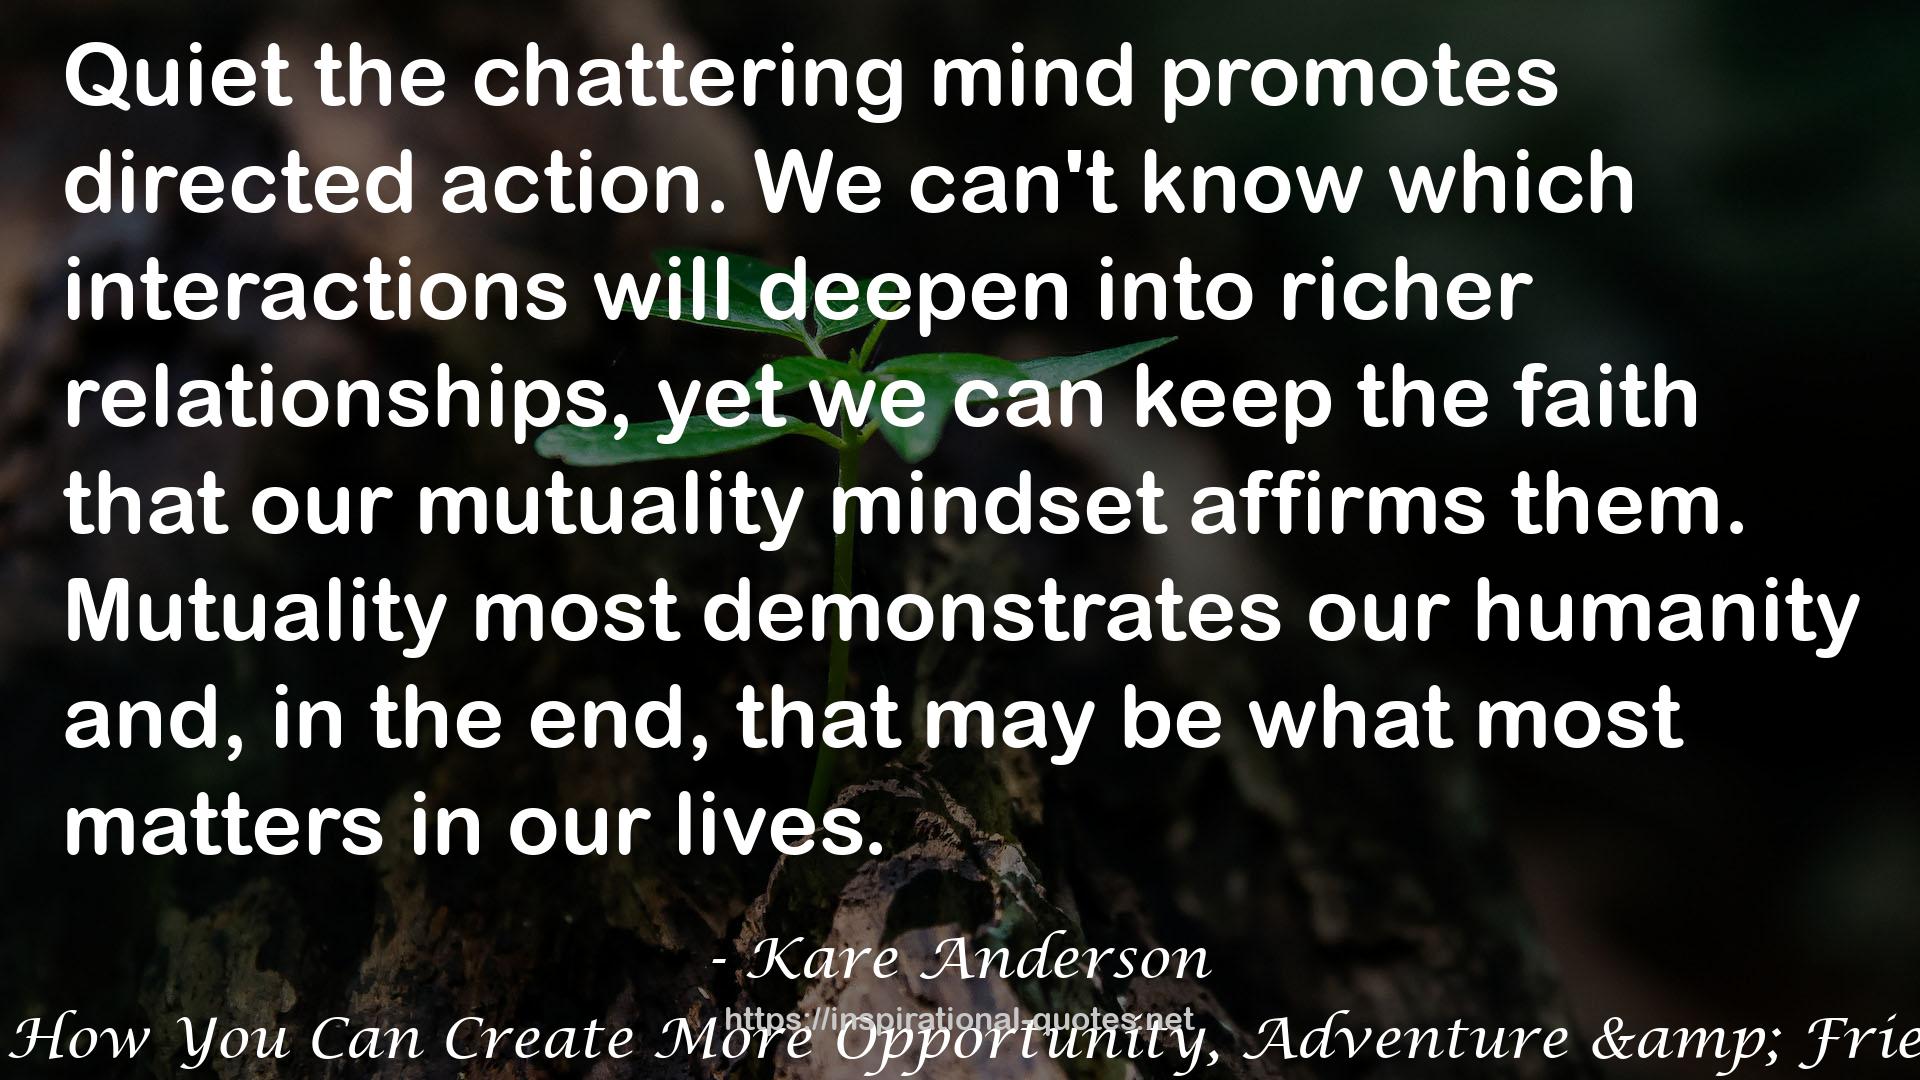 Mutuality Matters How You Can Create More Opportunity, Adventure & Friendship With Others QUOTES